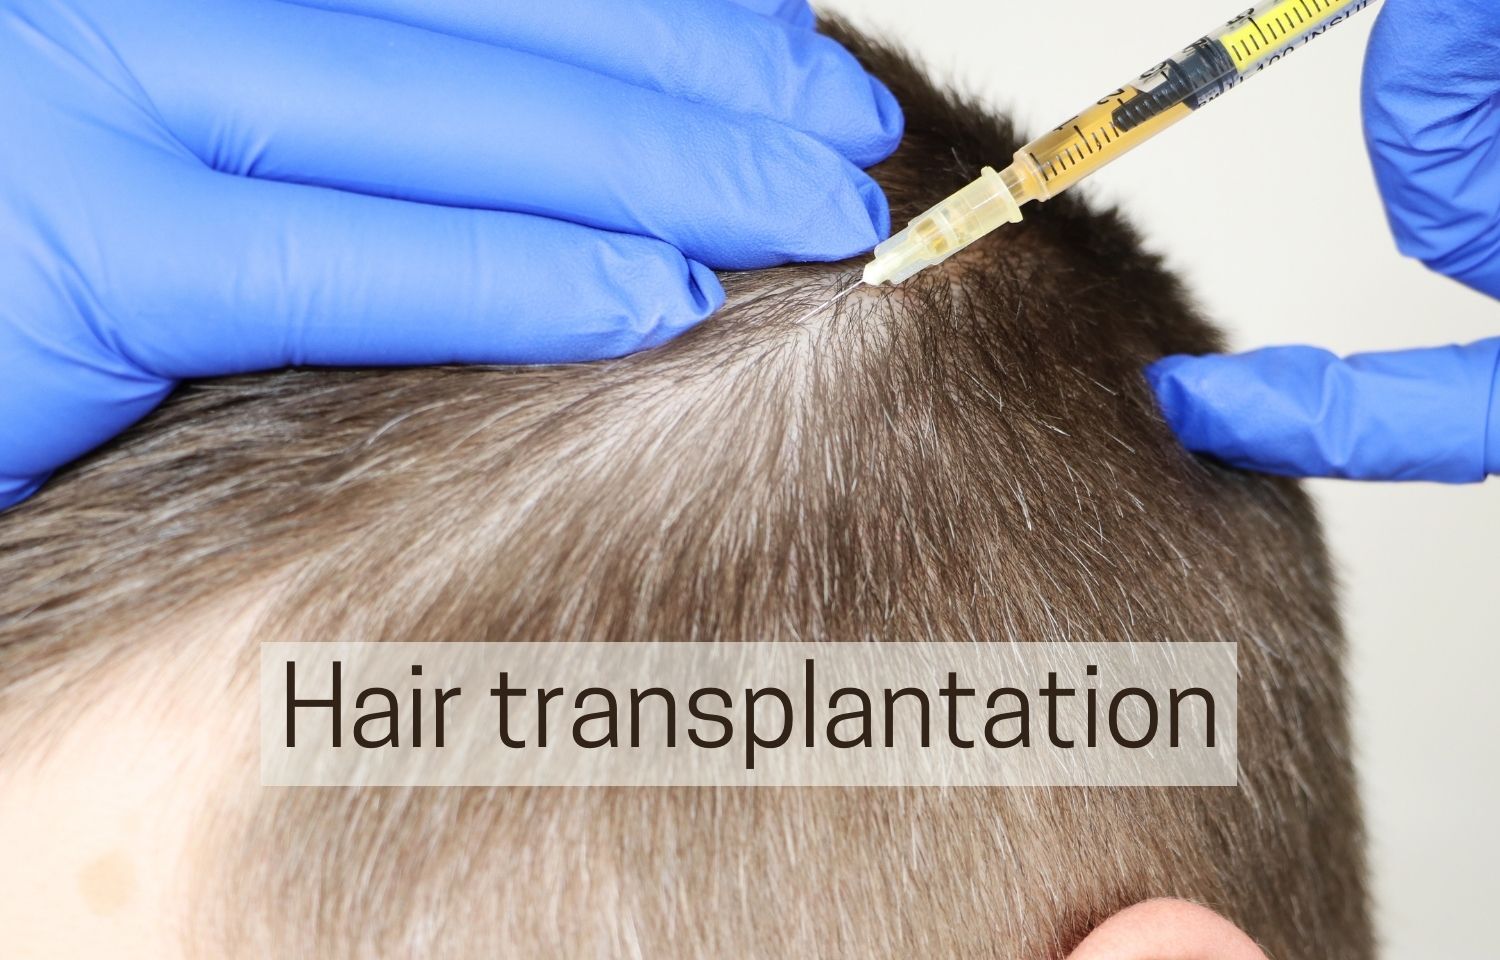 Hair Transplantation facility told to refund after denying surgery to  Diabetic patient